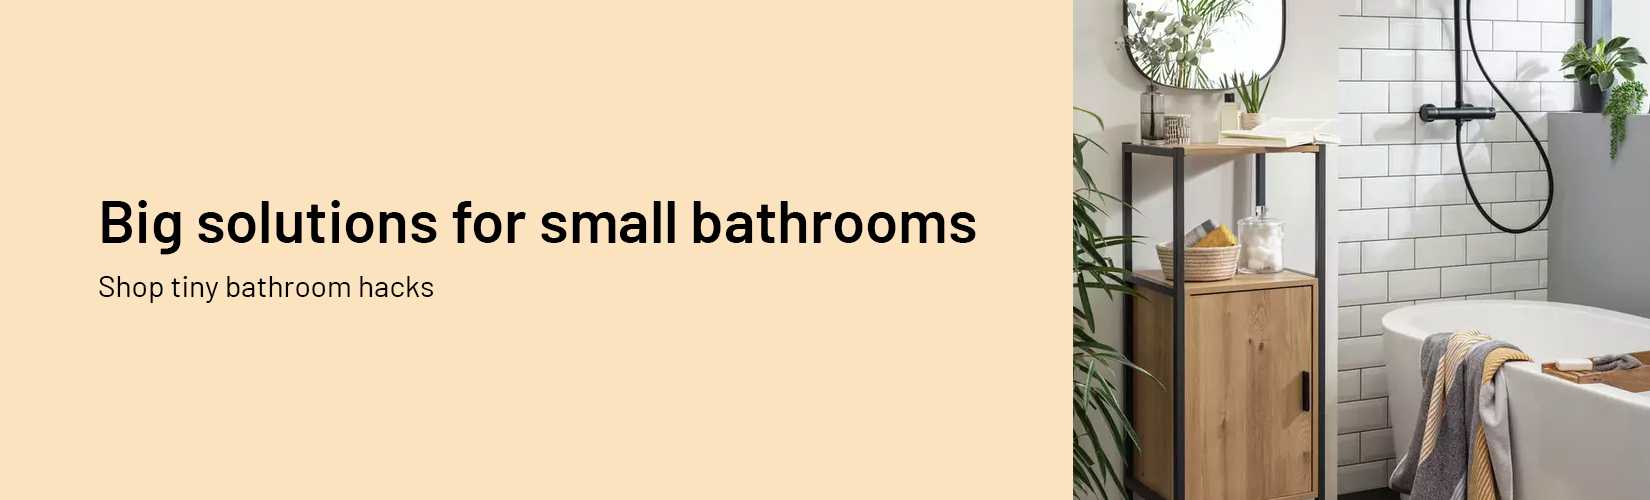 Big solutions for small bathrooms.